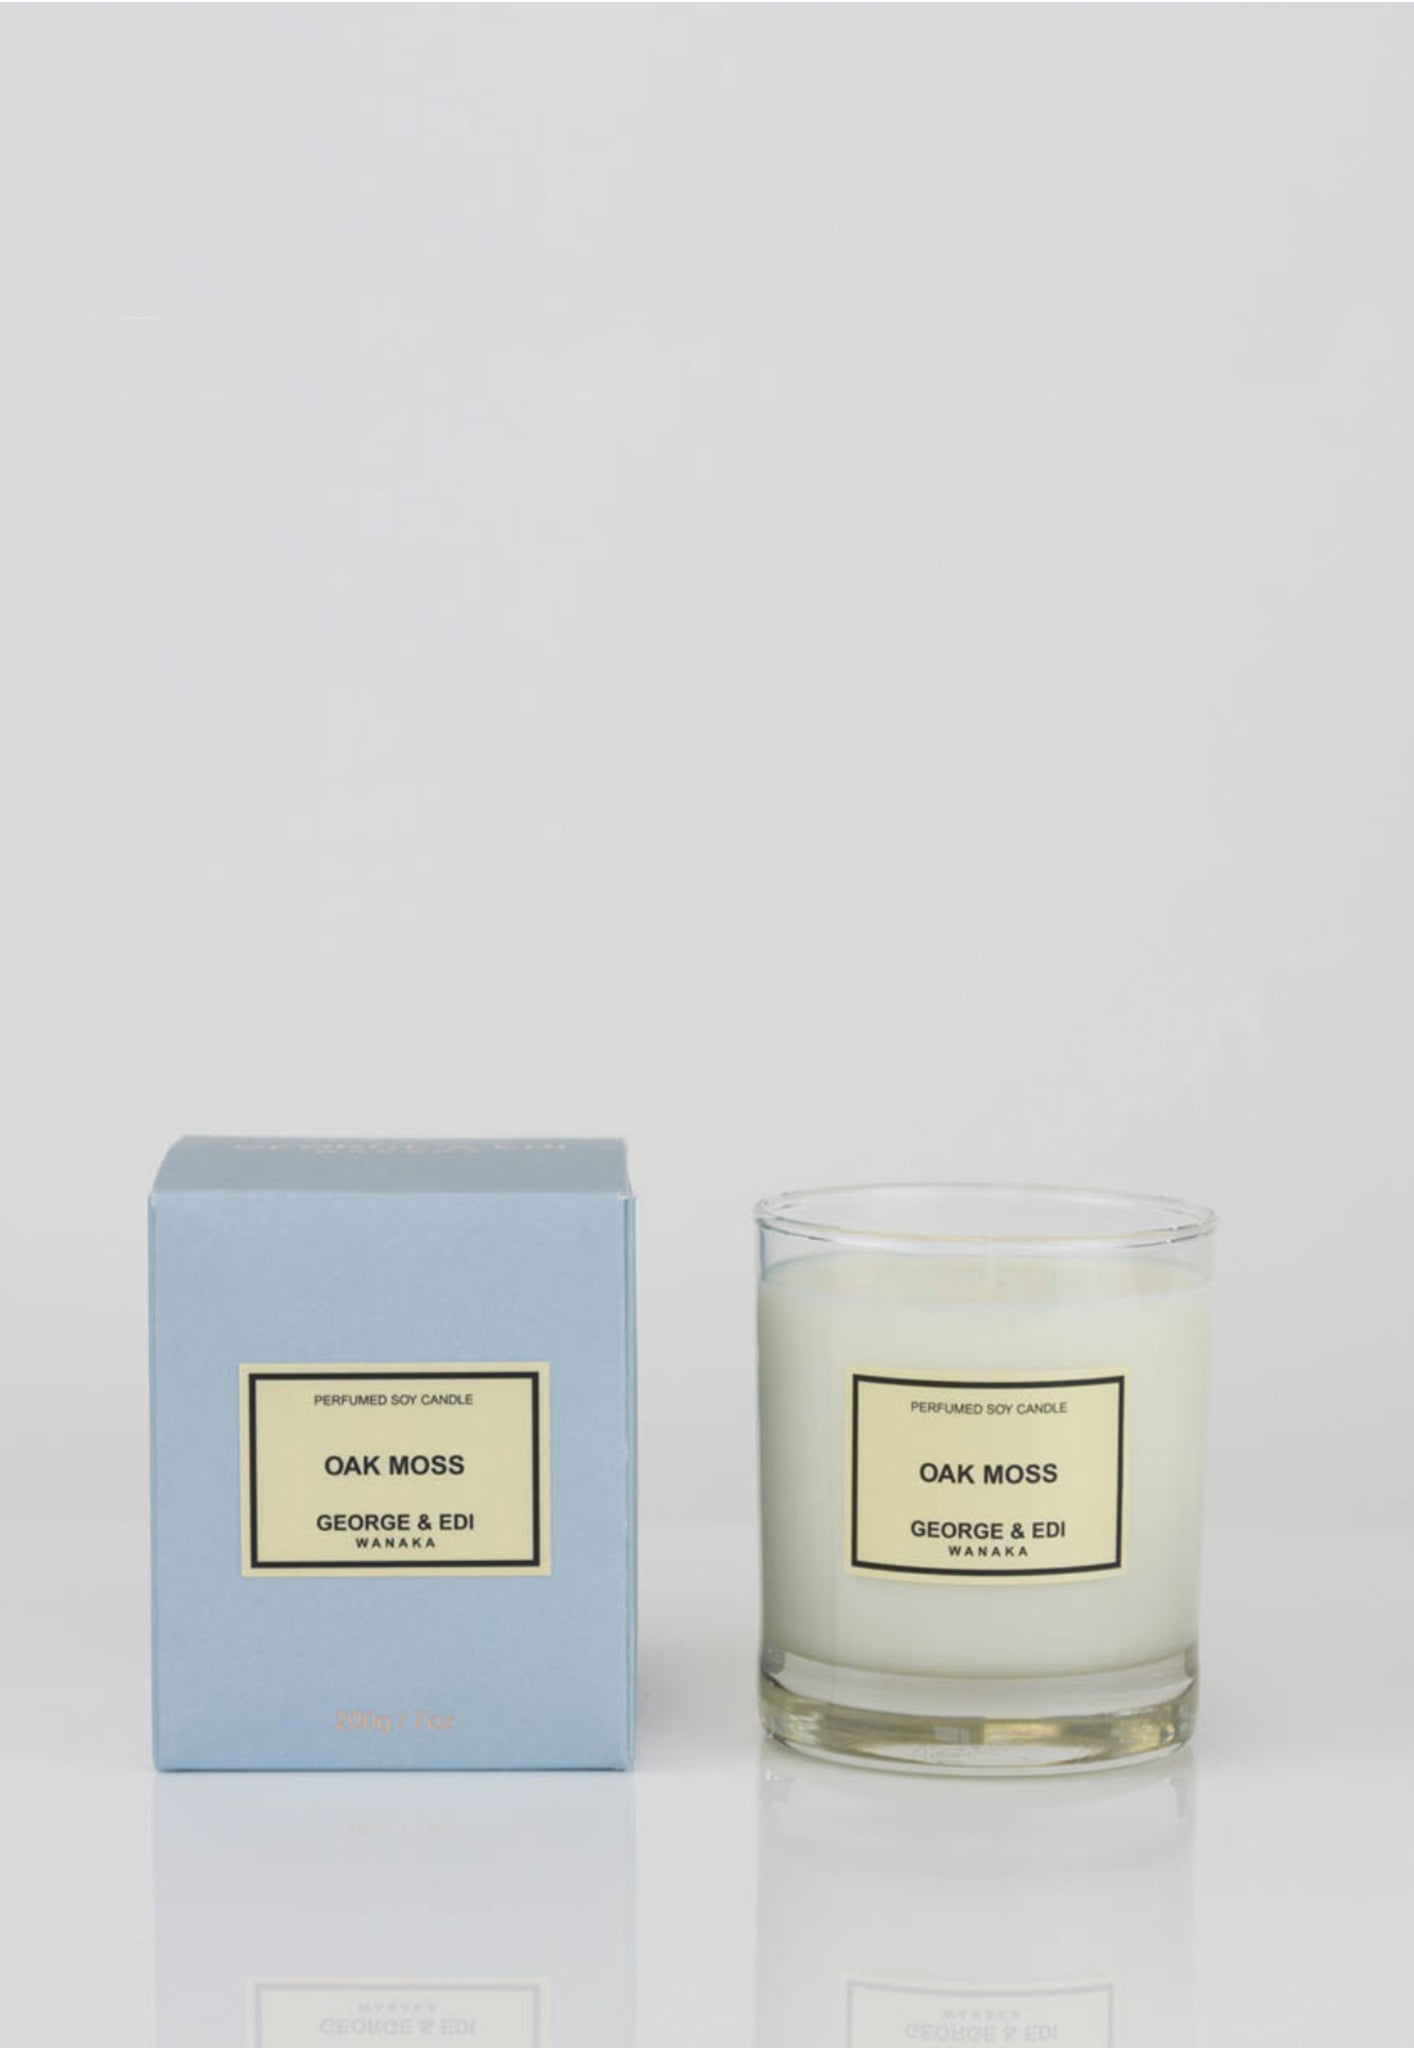 Oak Moss Perfumed Soy Candle sold by Angel Divine